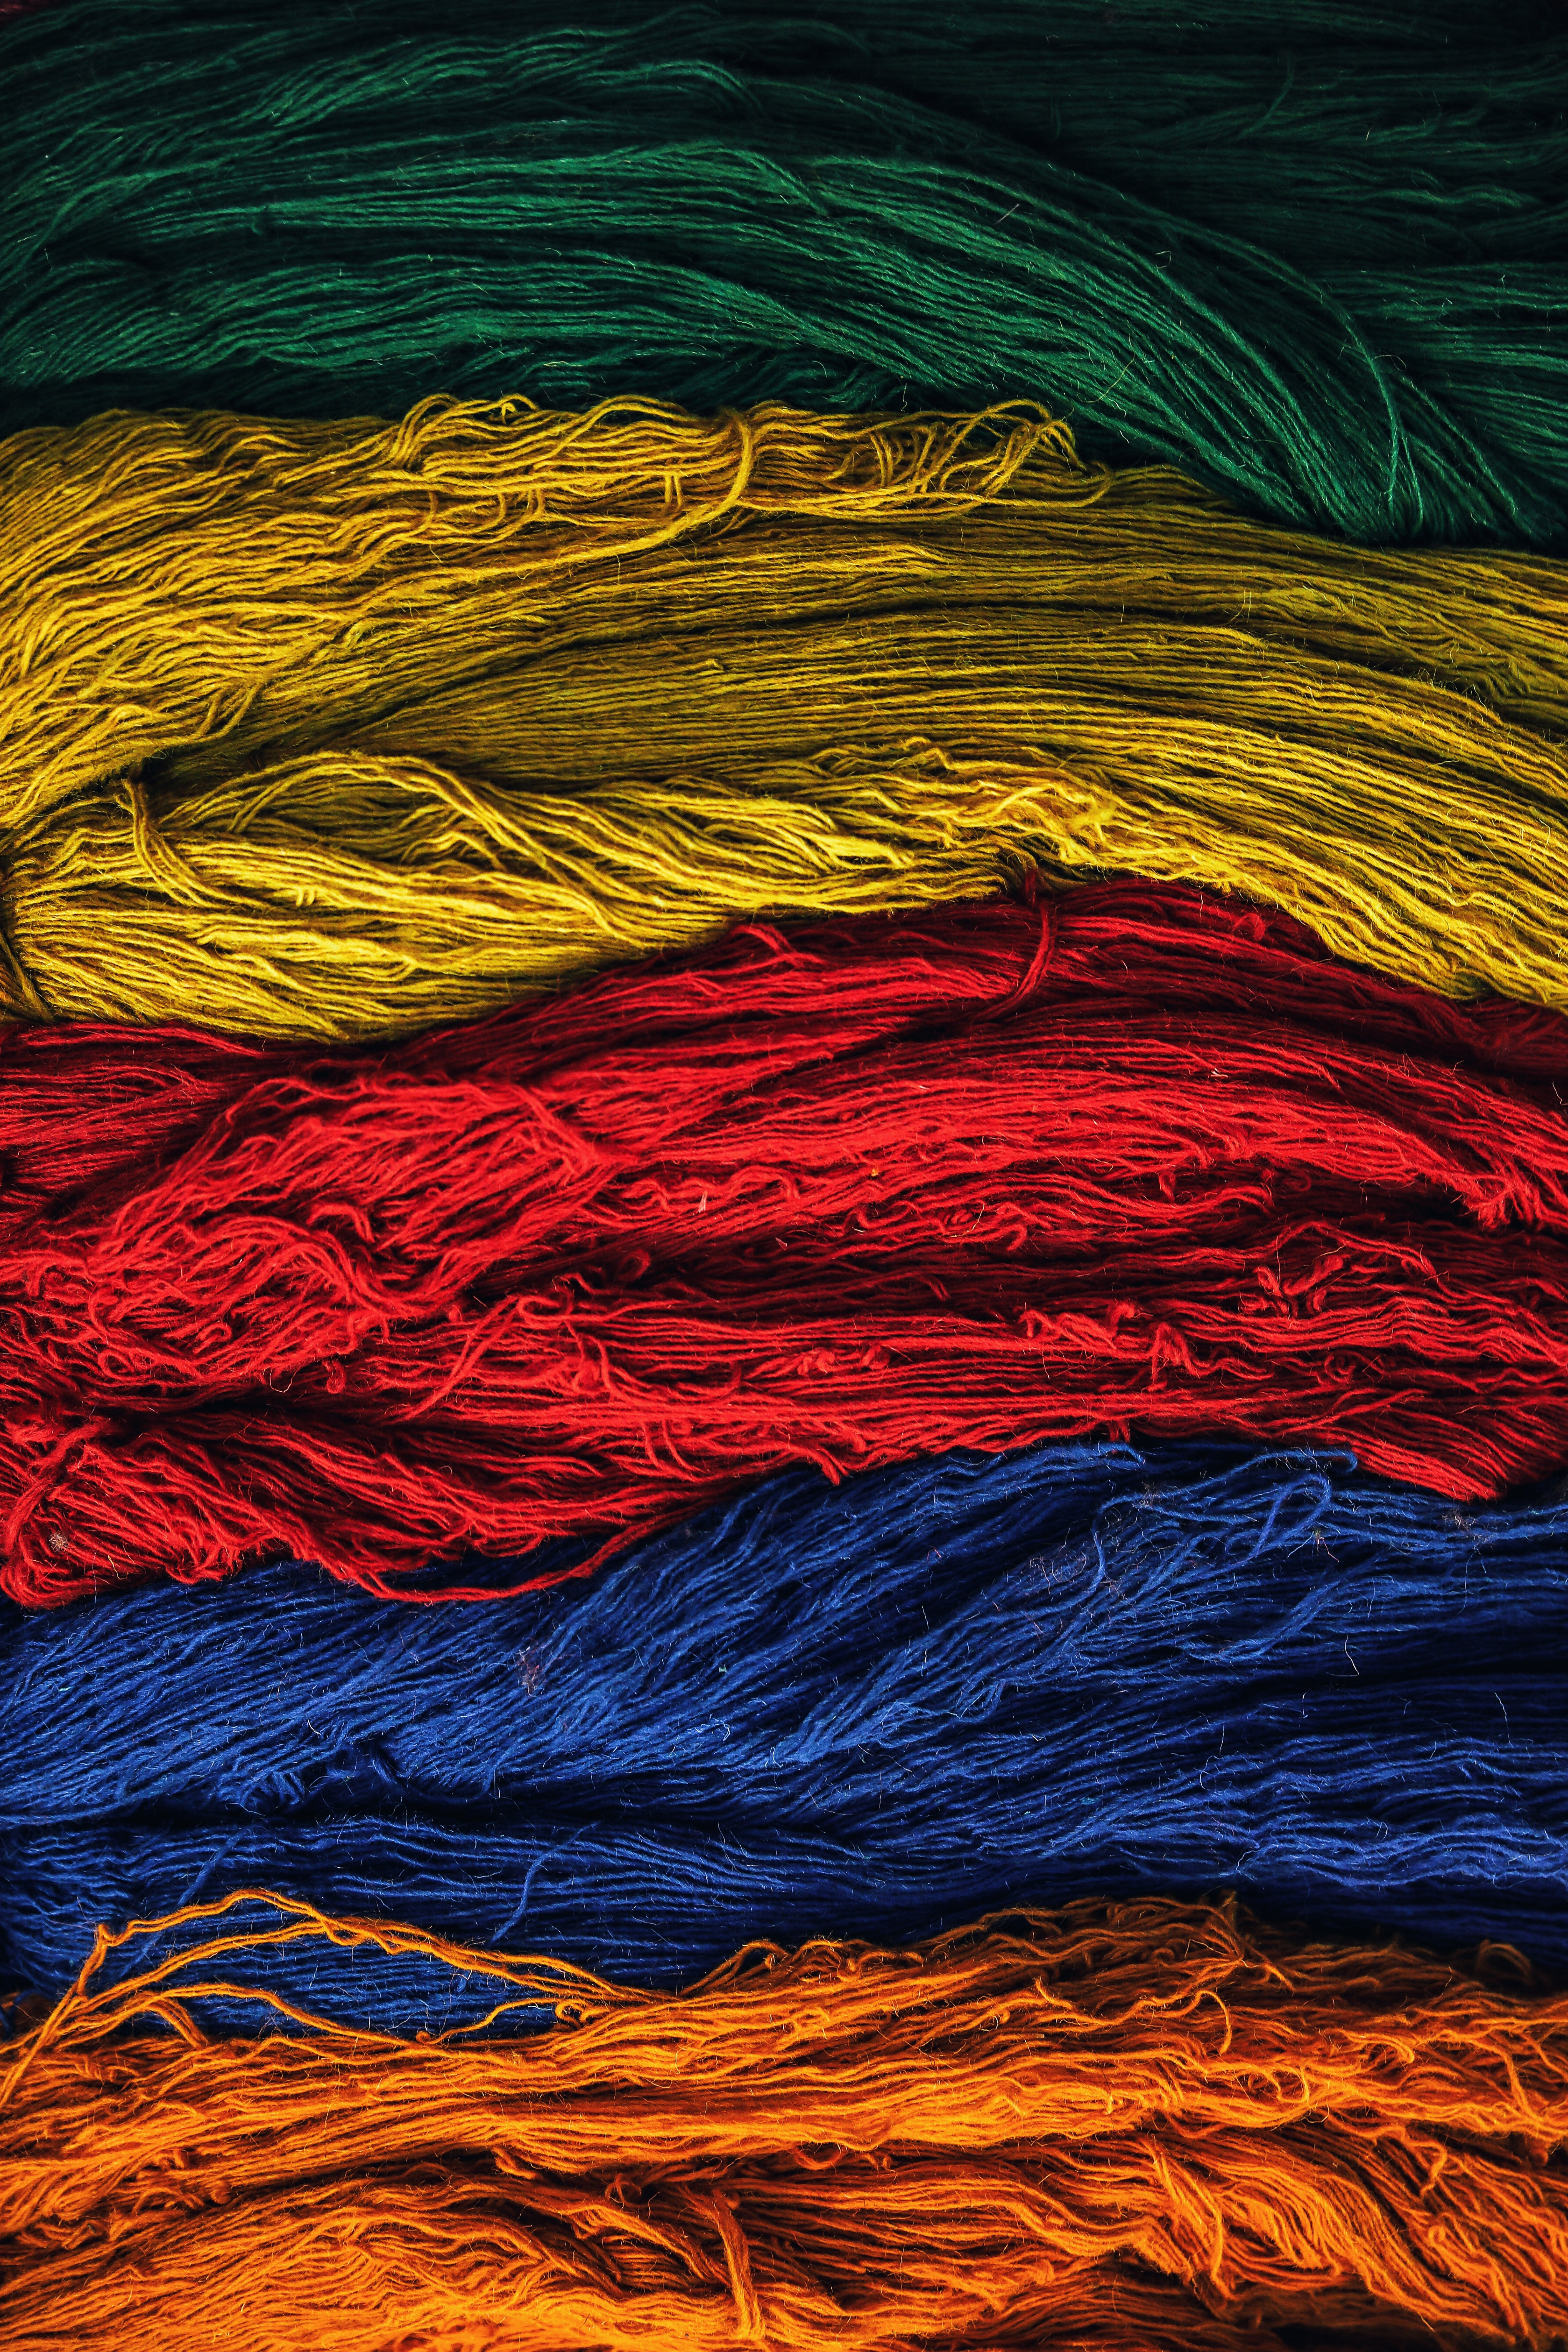 motley, multicolored, texture, textures, cloth, threads, thread Image for desktop